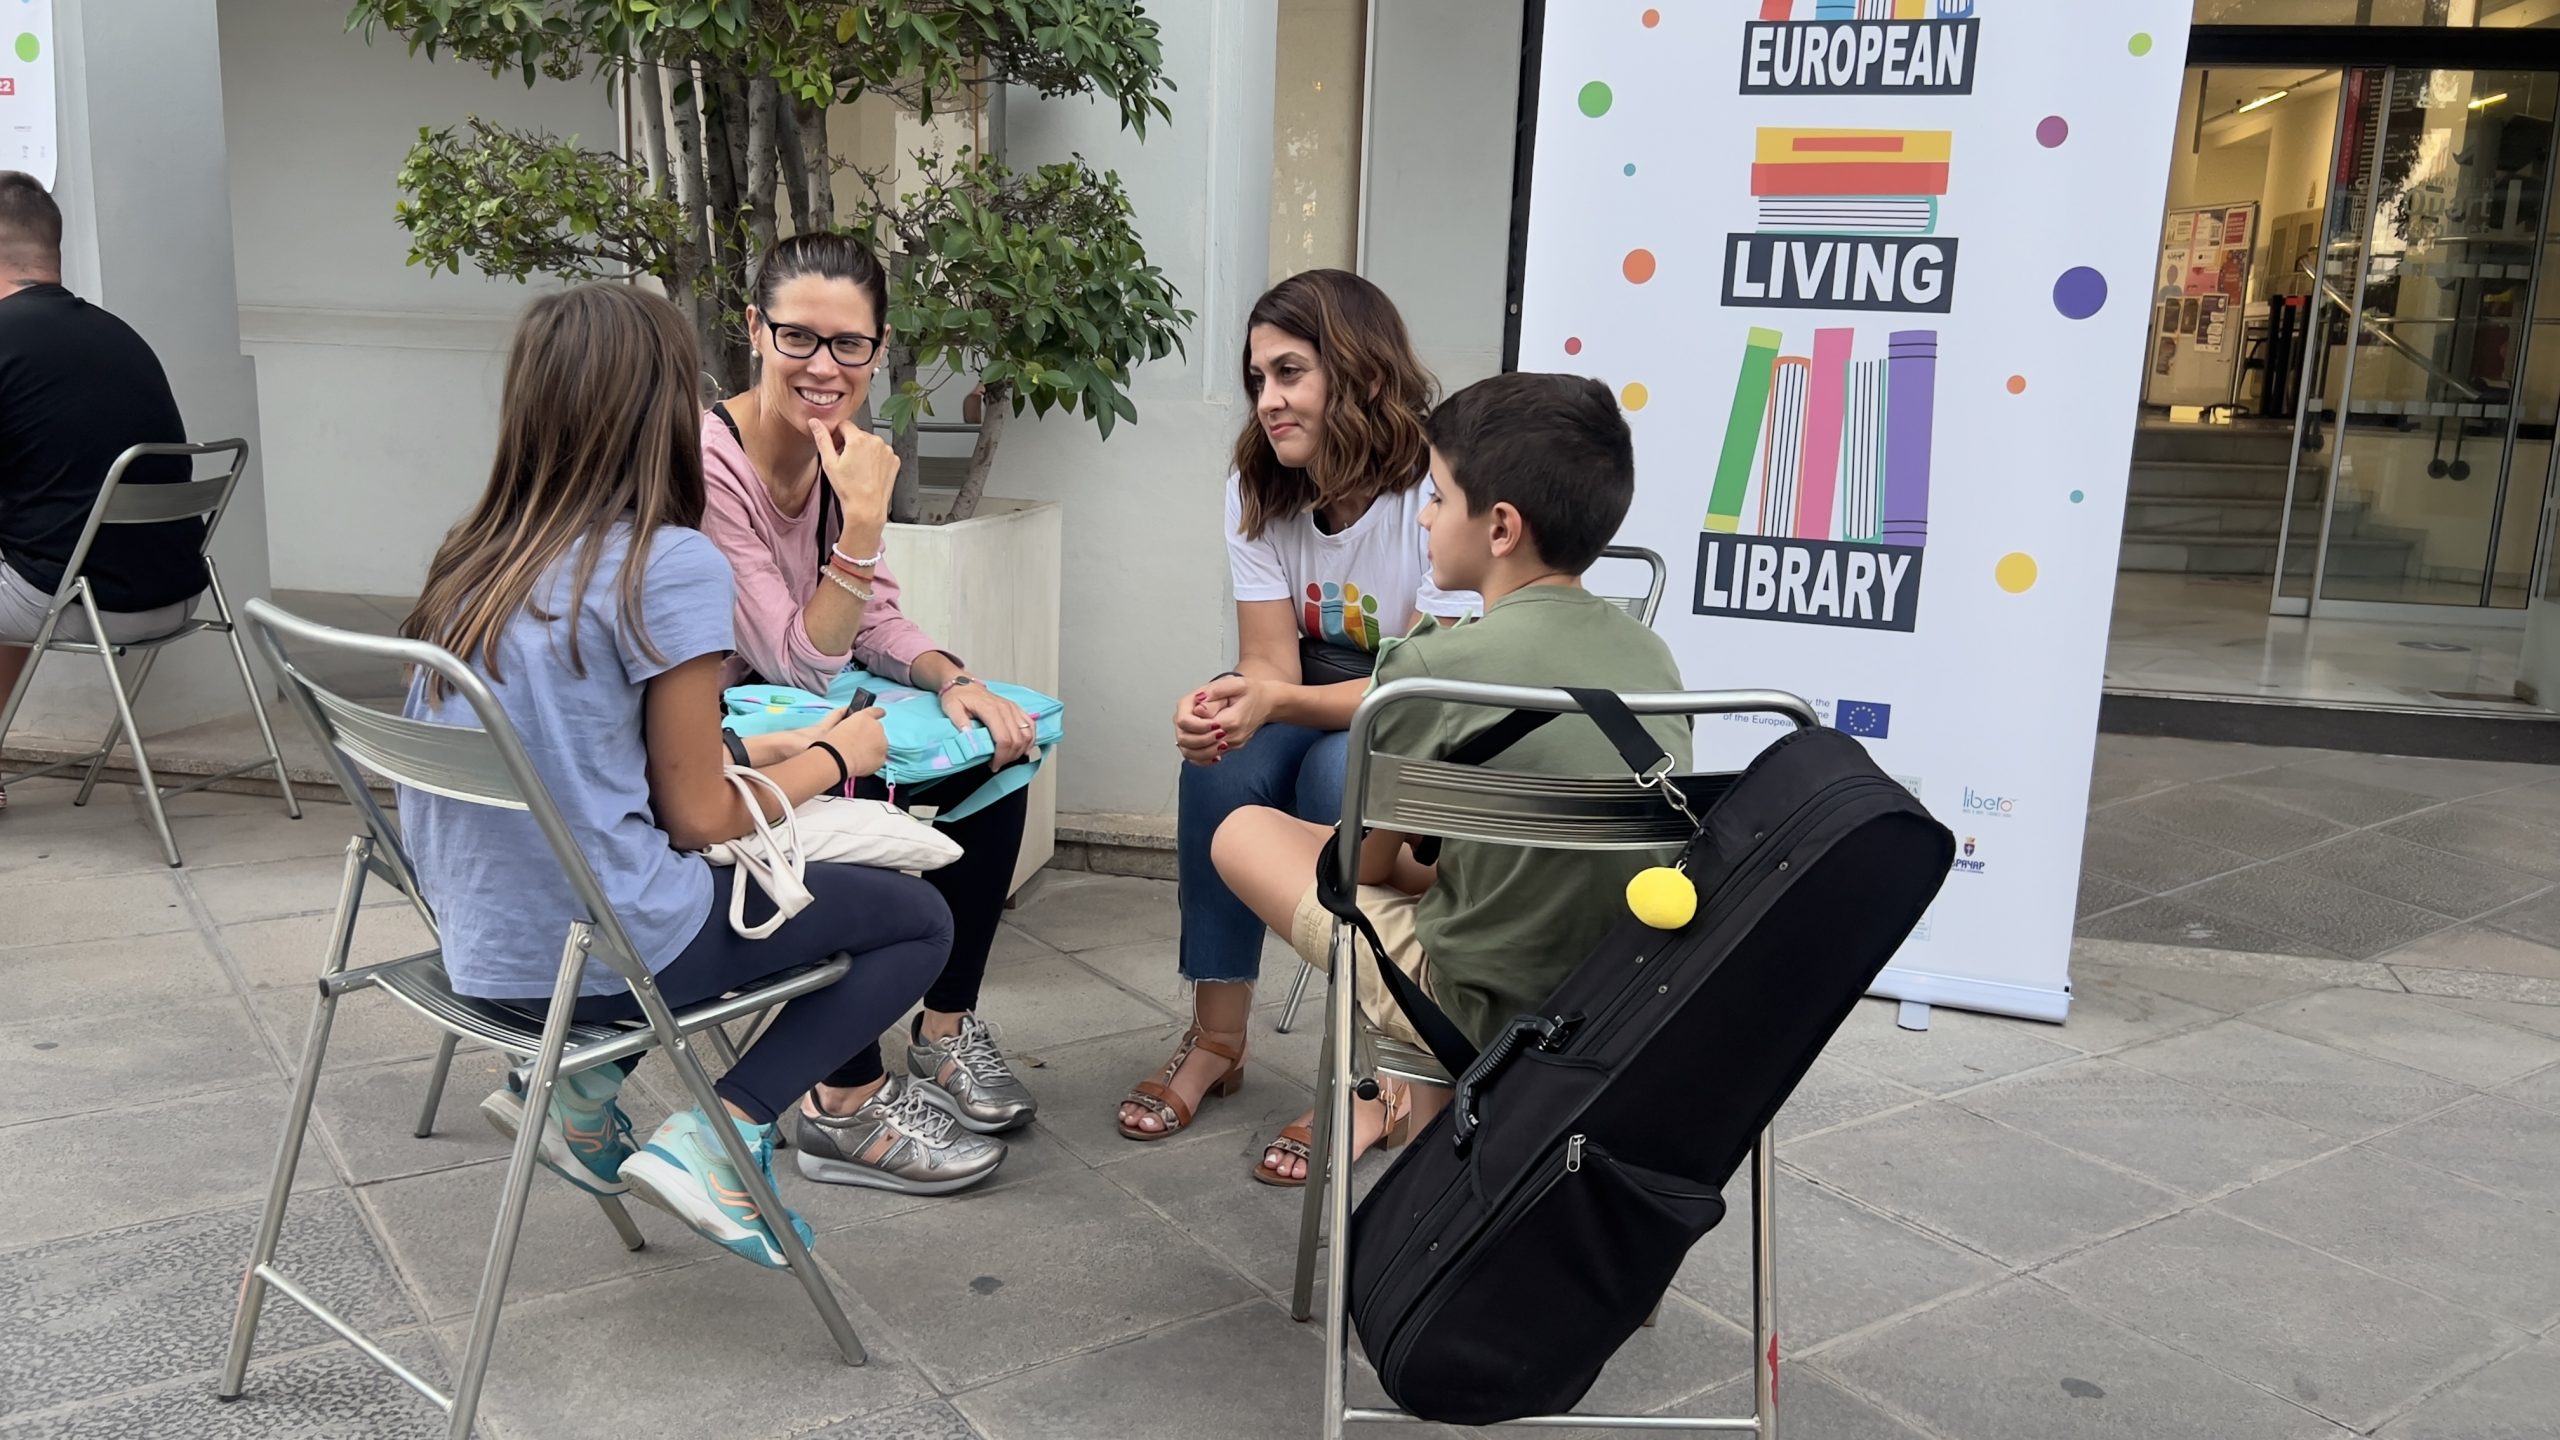 Read more about the article EUROPEAN LIVING LIBRARY HELD IN VALENCIA, SPAIN